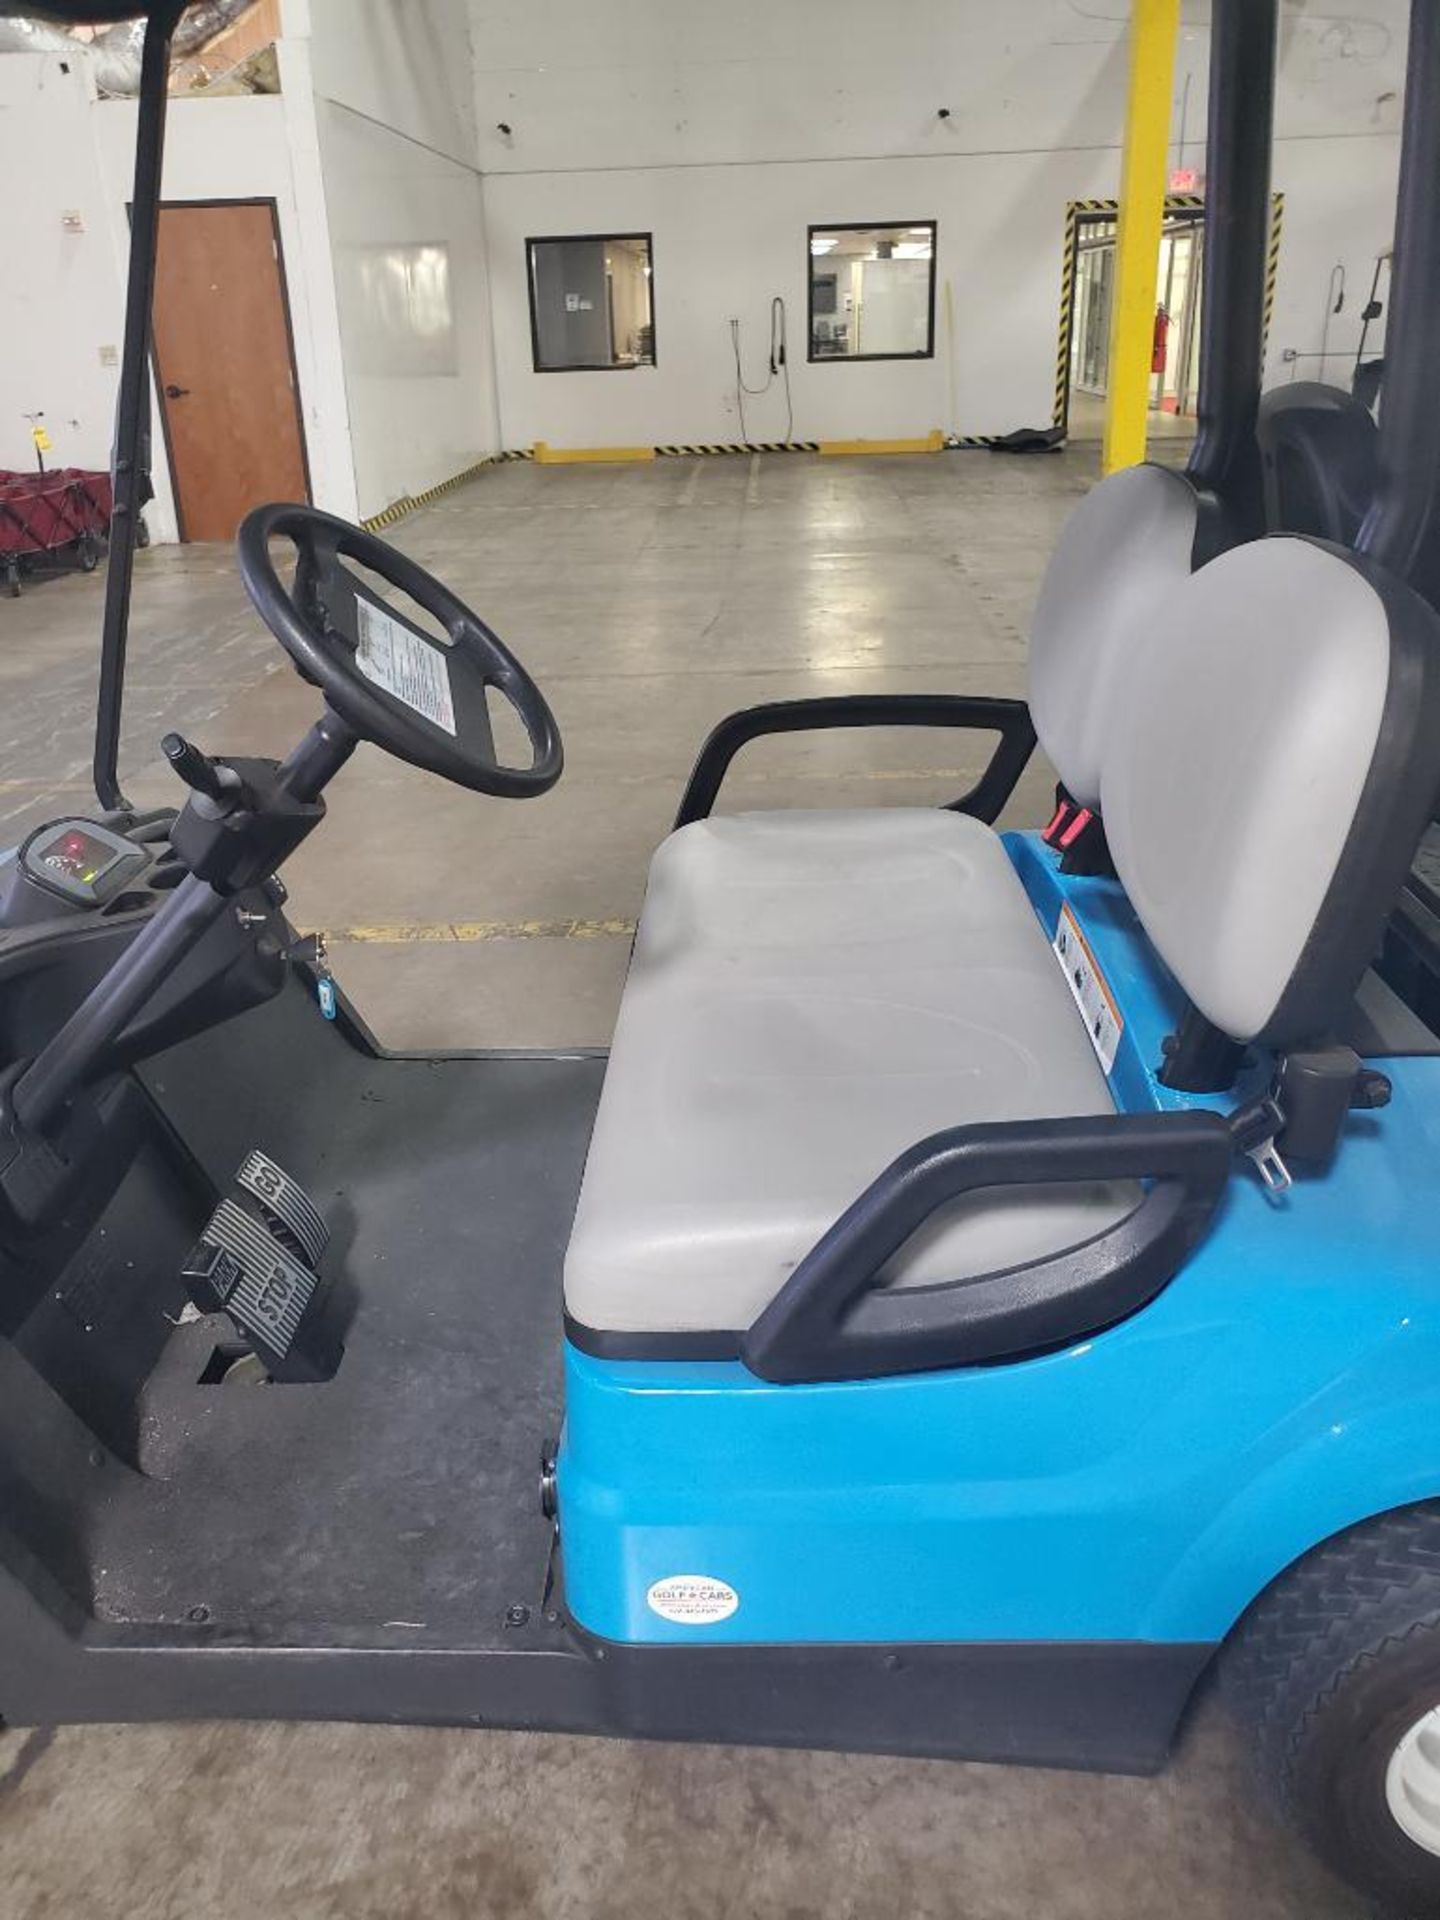 ADVANCED EV ELECTRIC GOLF CART; MODEL LT-A627, 2+2, S/N LTA0025369, RATED SPEED 25-MPH, REAR BENCH S - Image 7 of 8